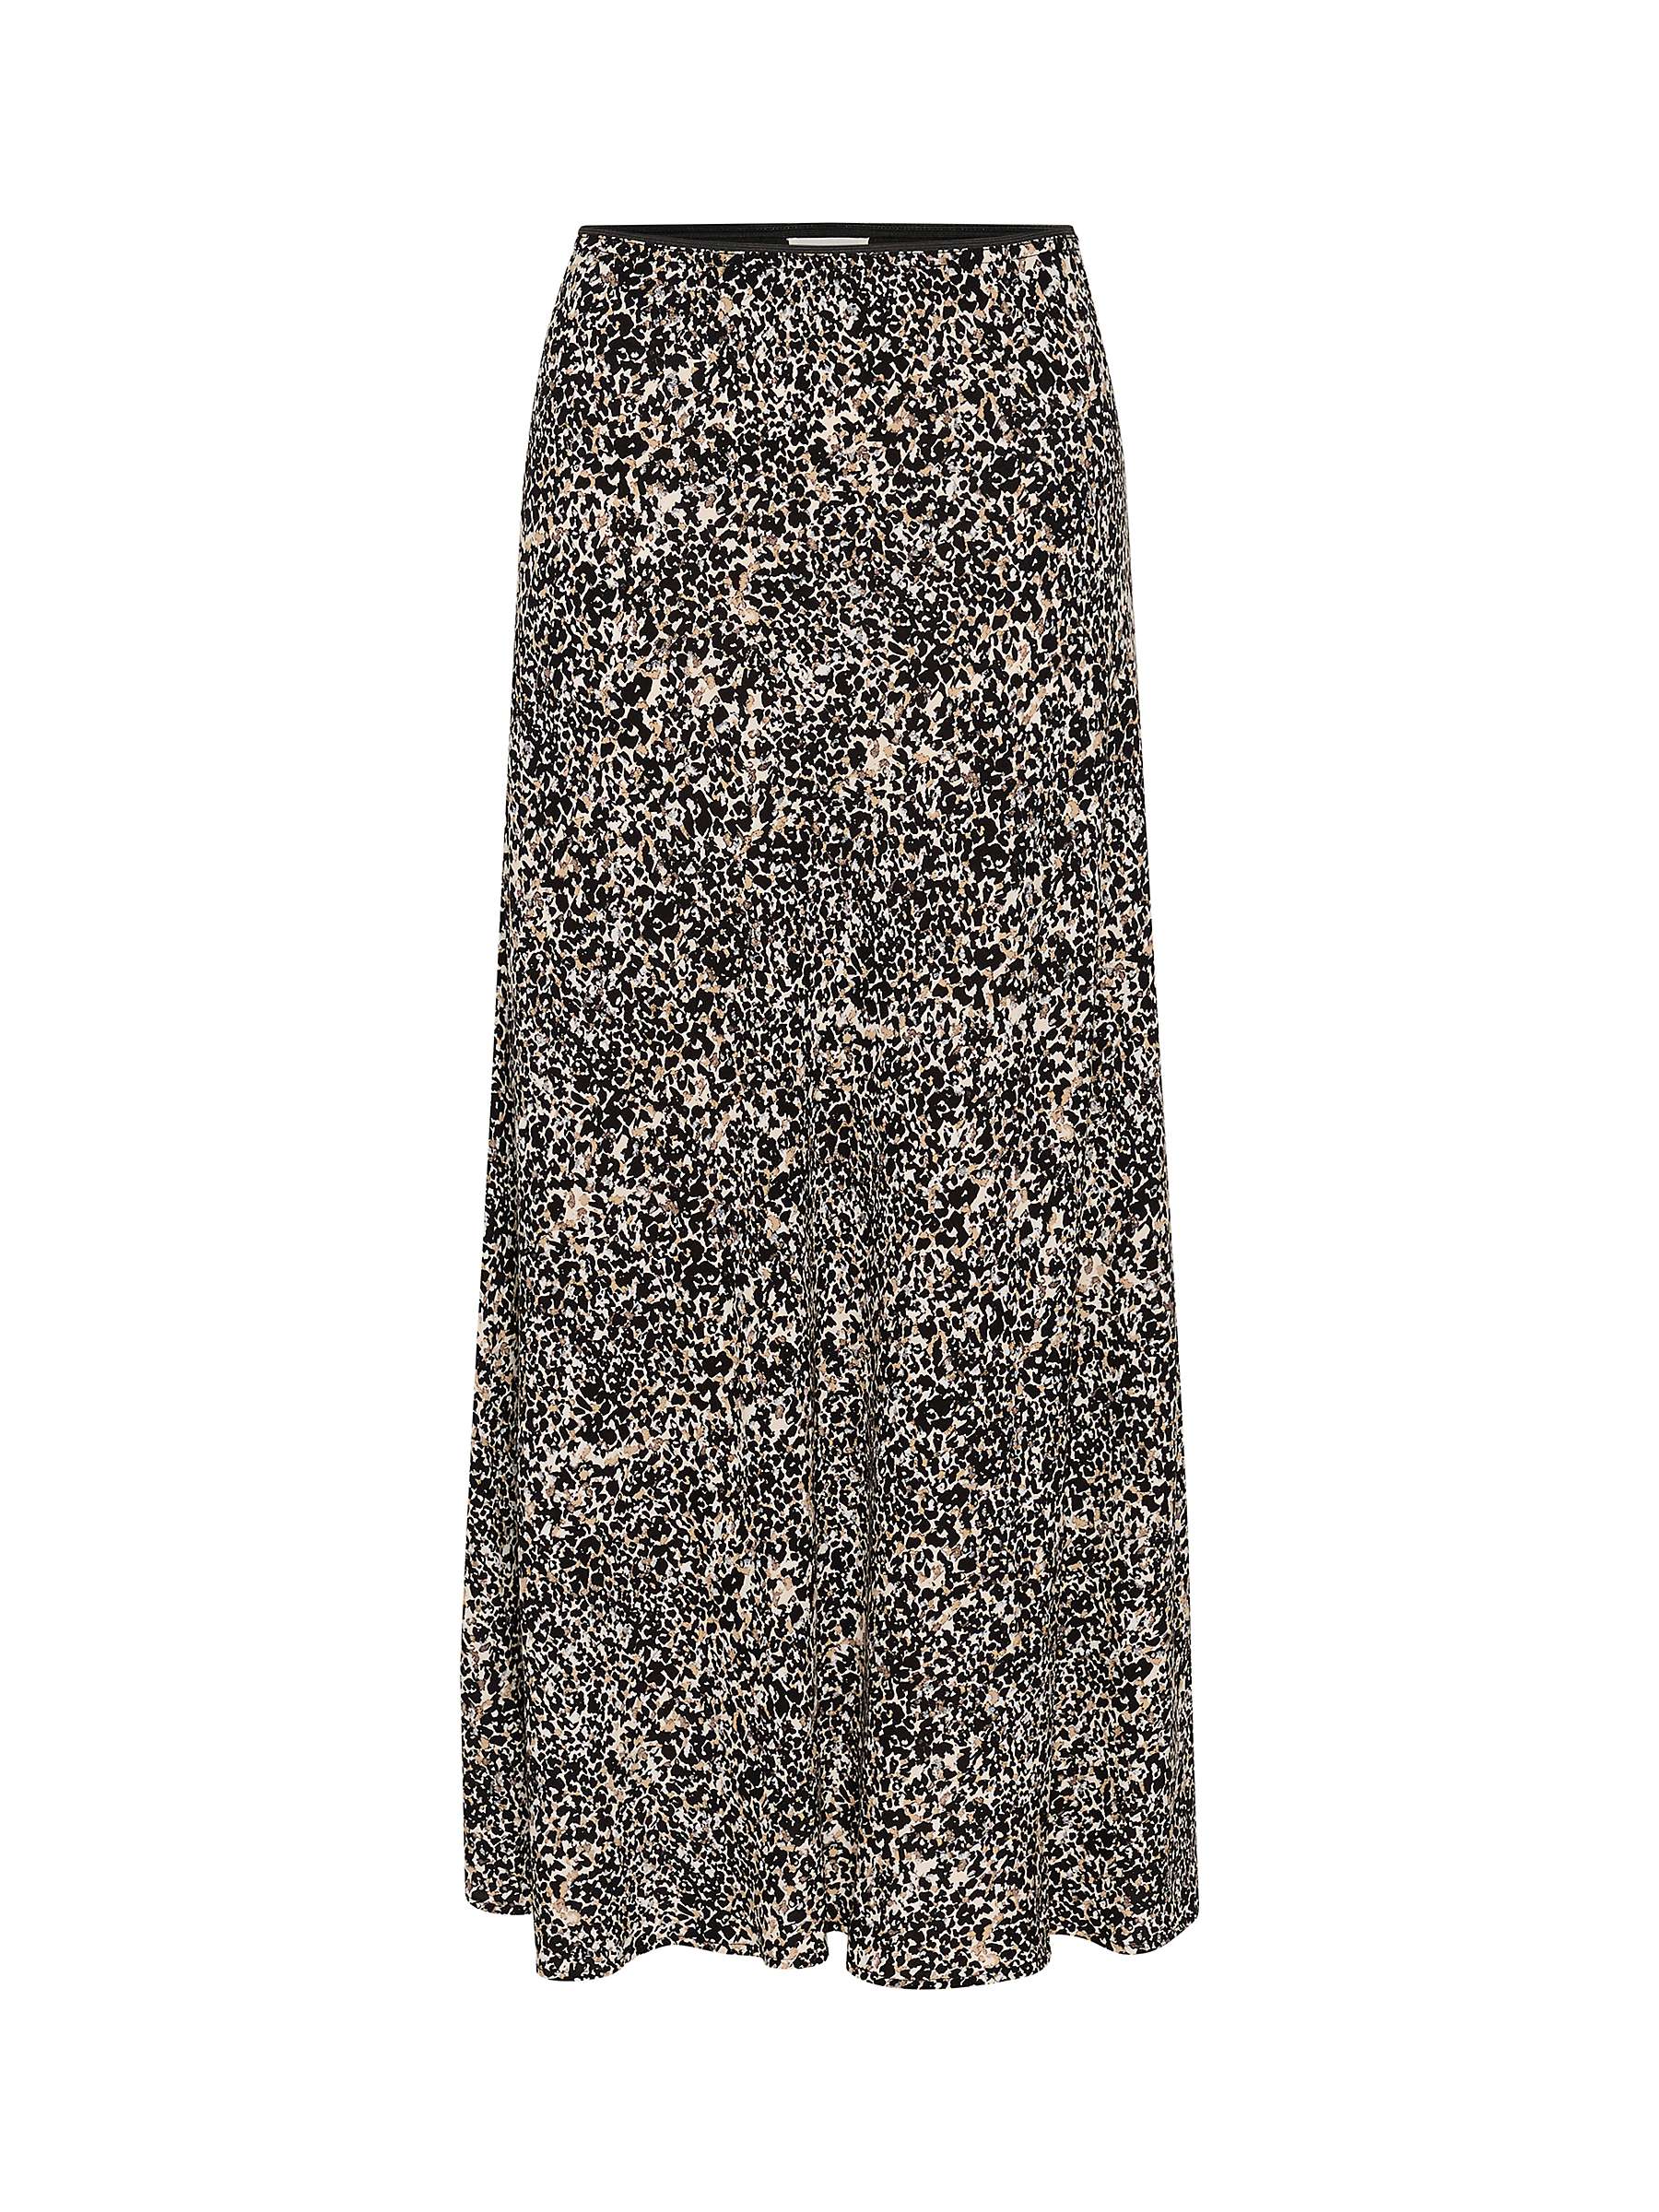 Buy Part Two Rin Mid Calf A-Line Skirt, Natural Scatter Online at johnlewis.com